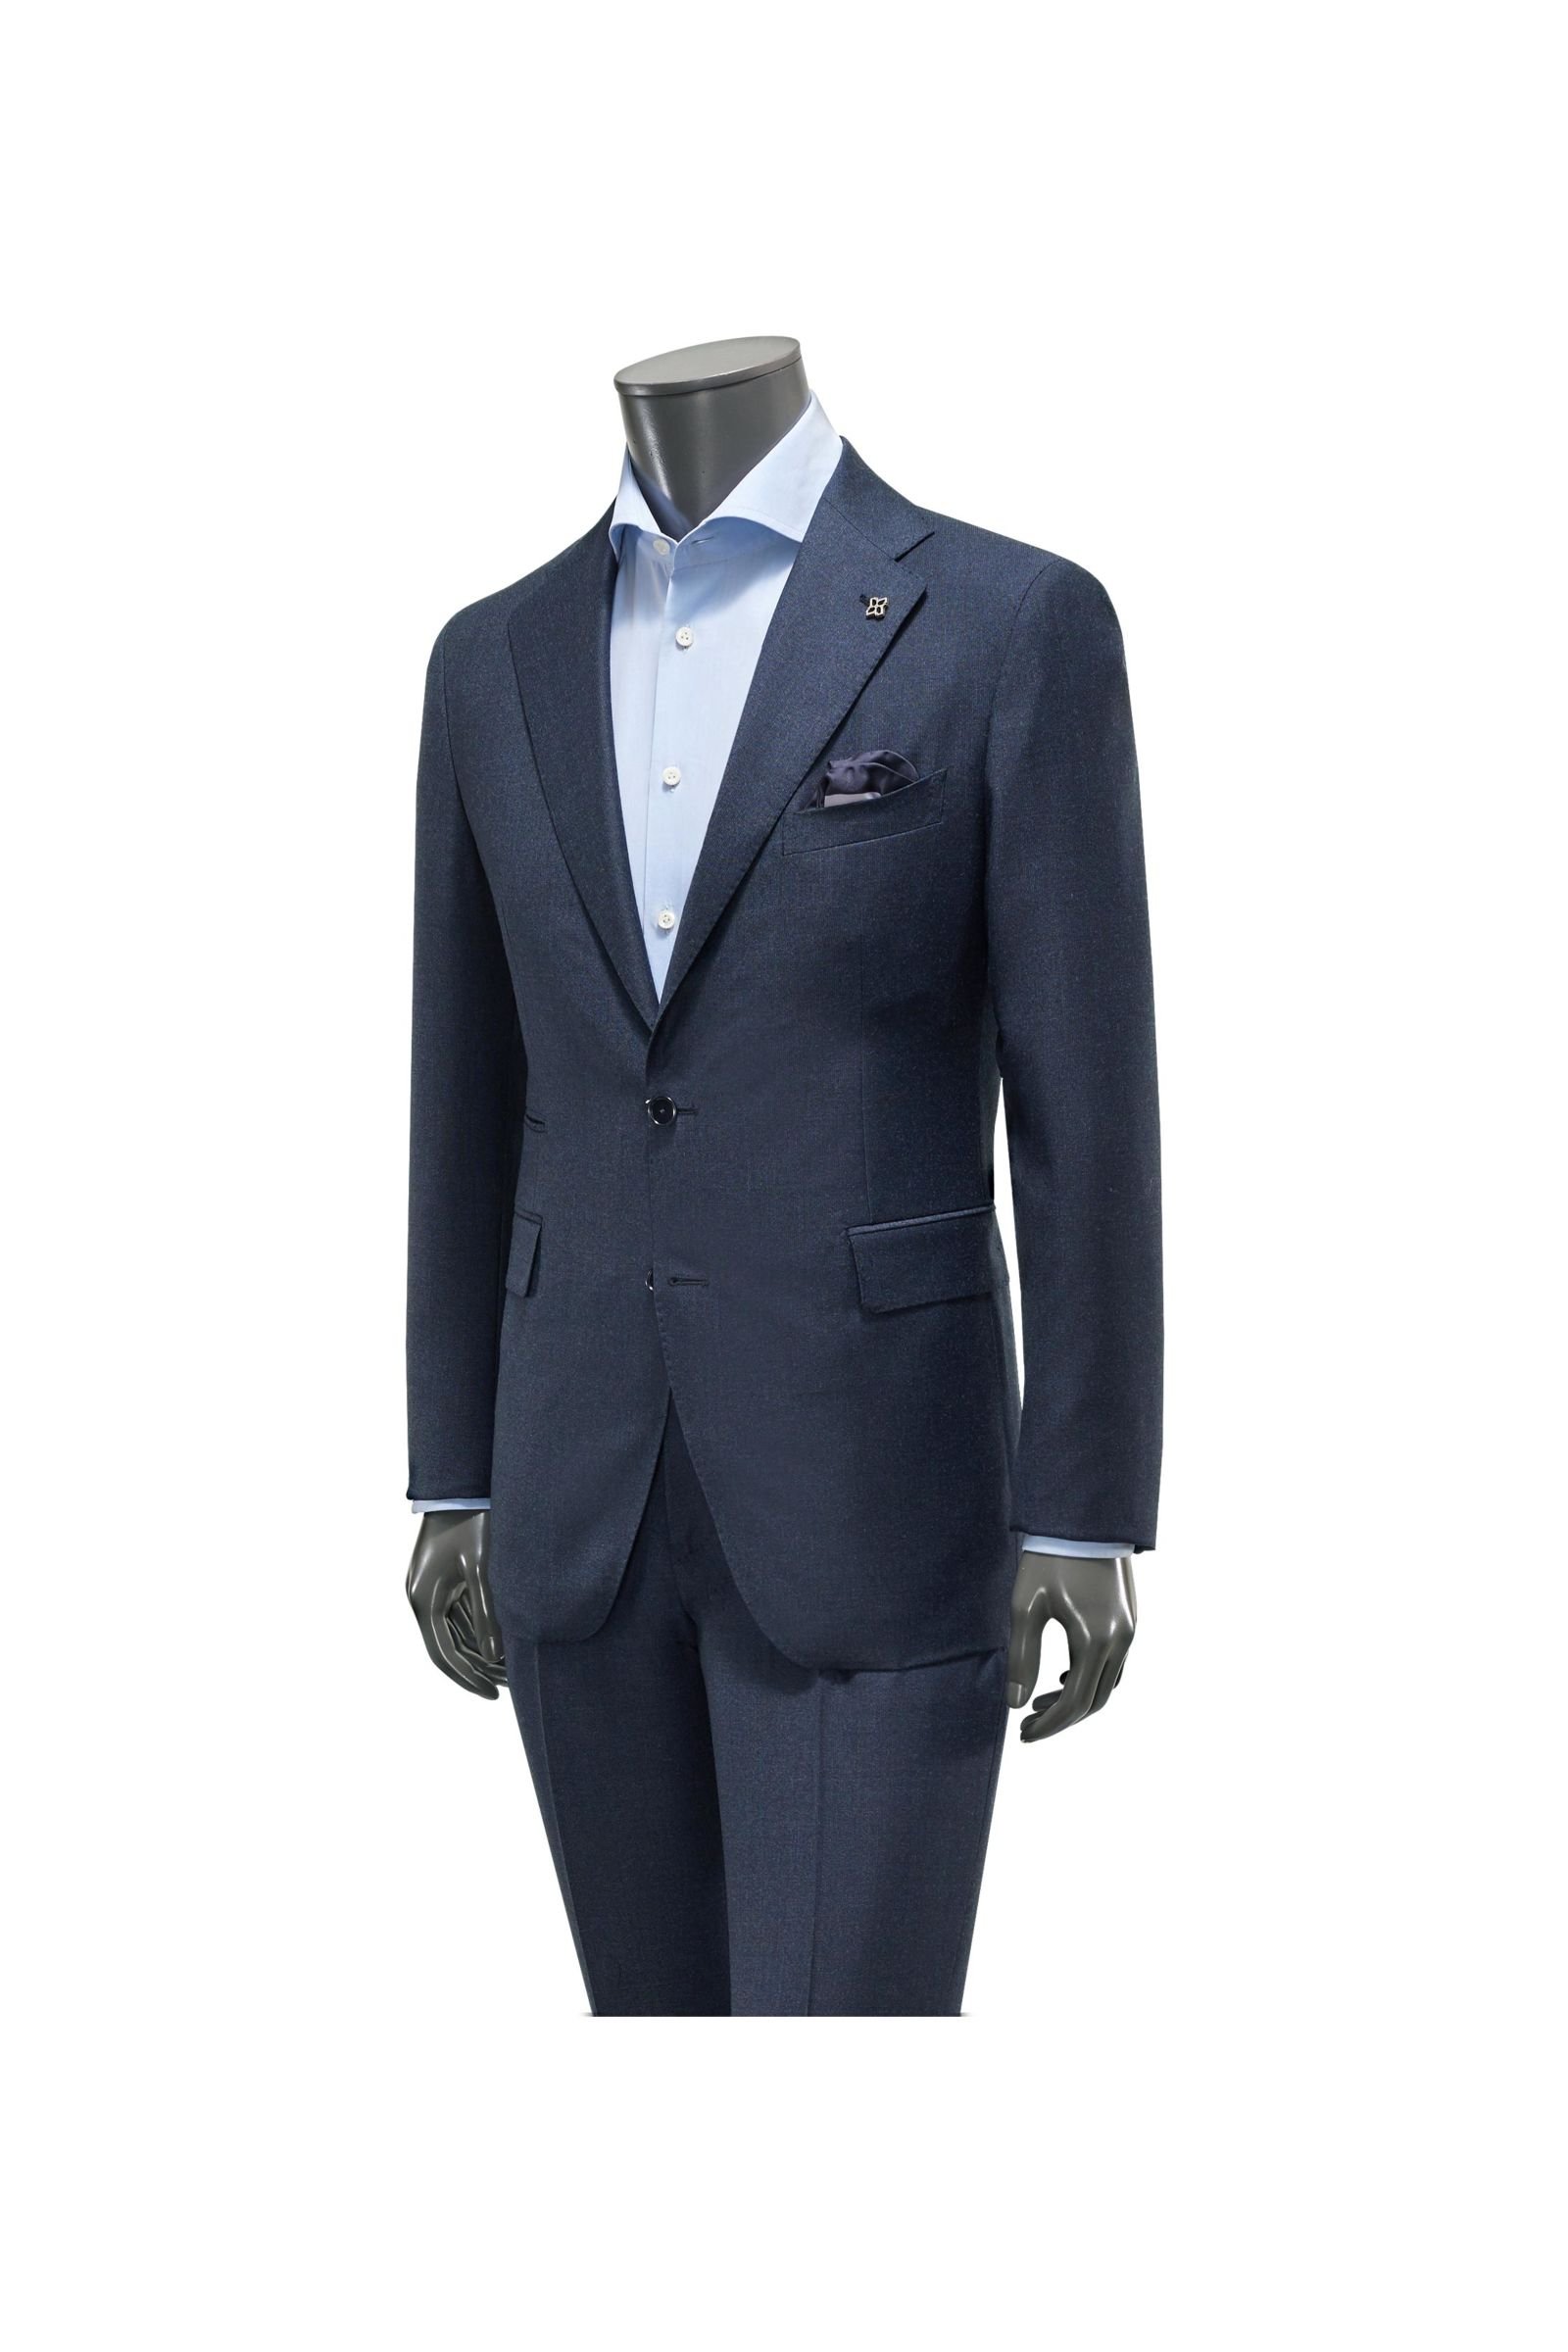 Suit navy patterned